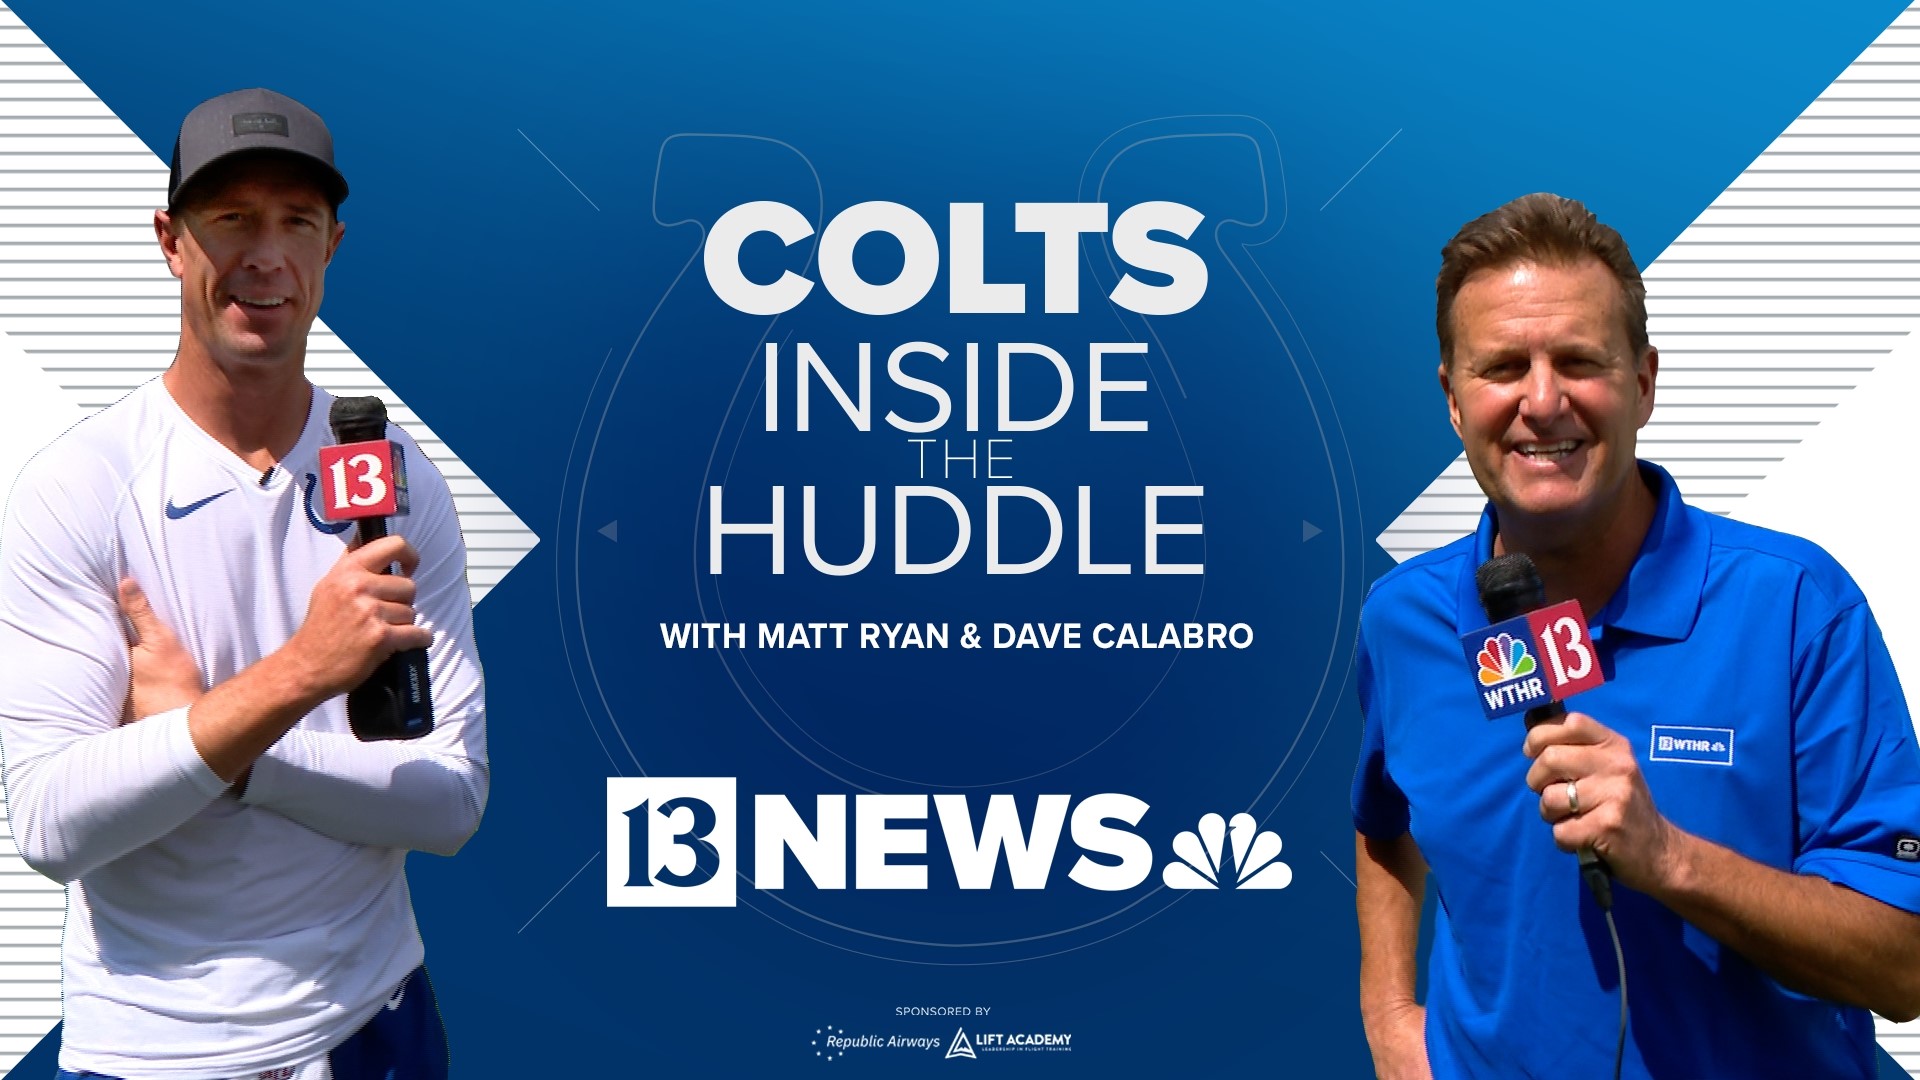 Viewers can watch “Inside the Huddle” on 13News every Wednesday at 6:20 p.m.